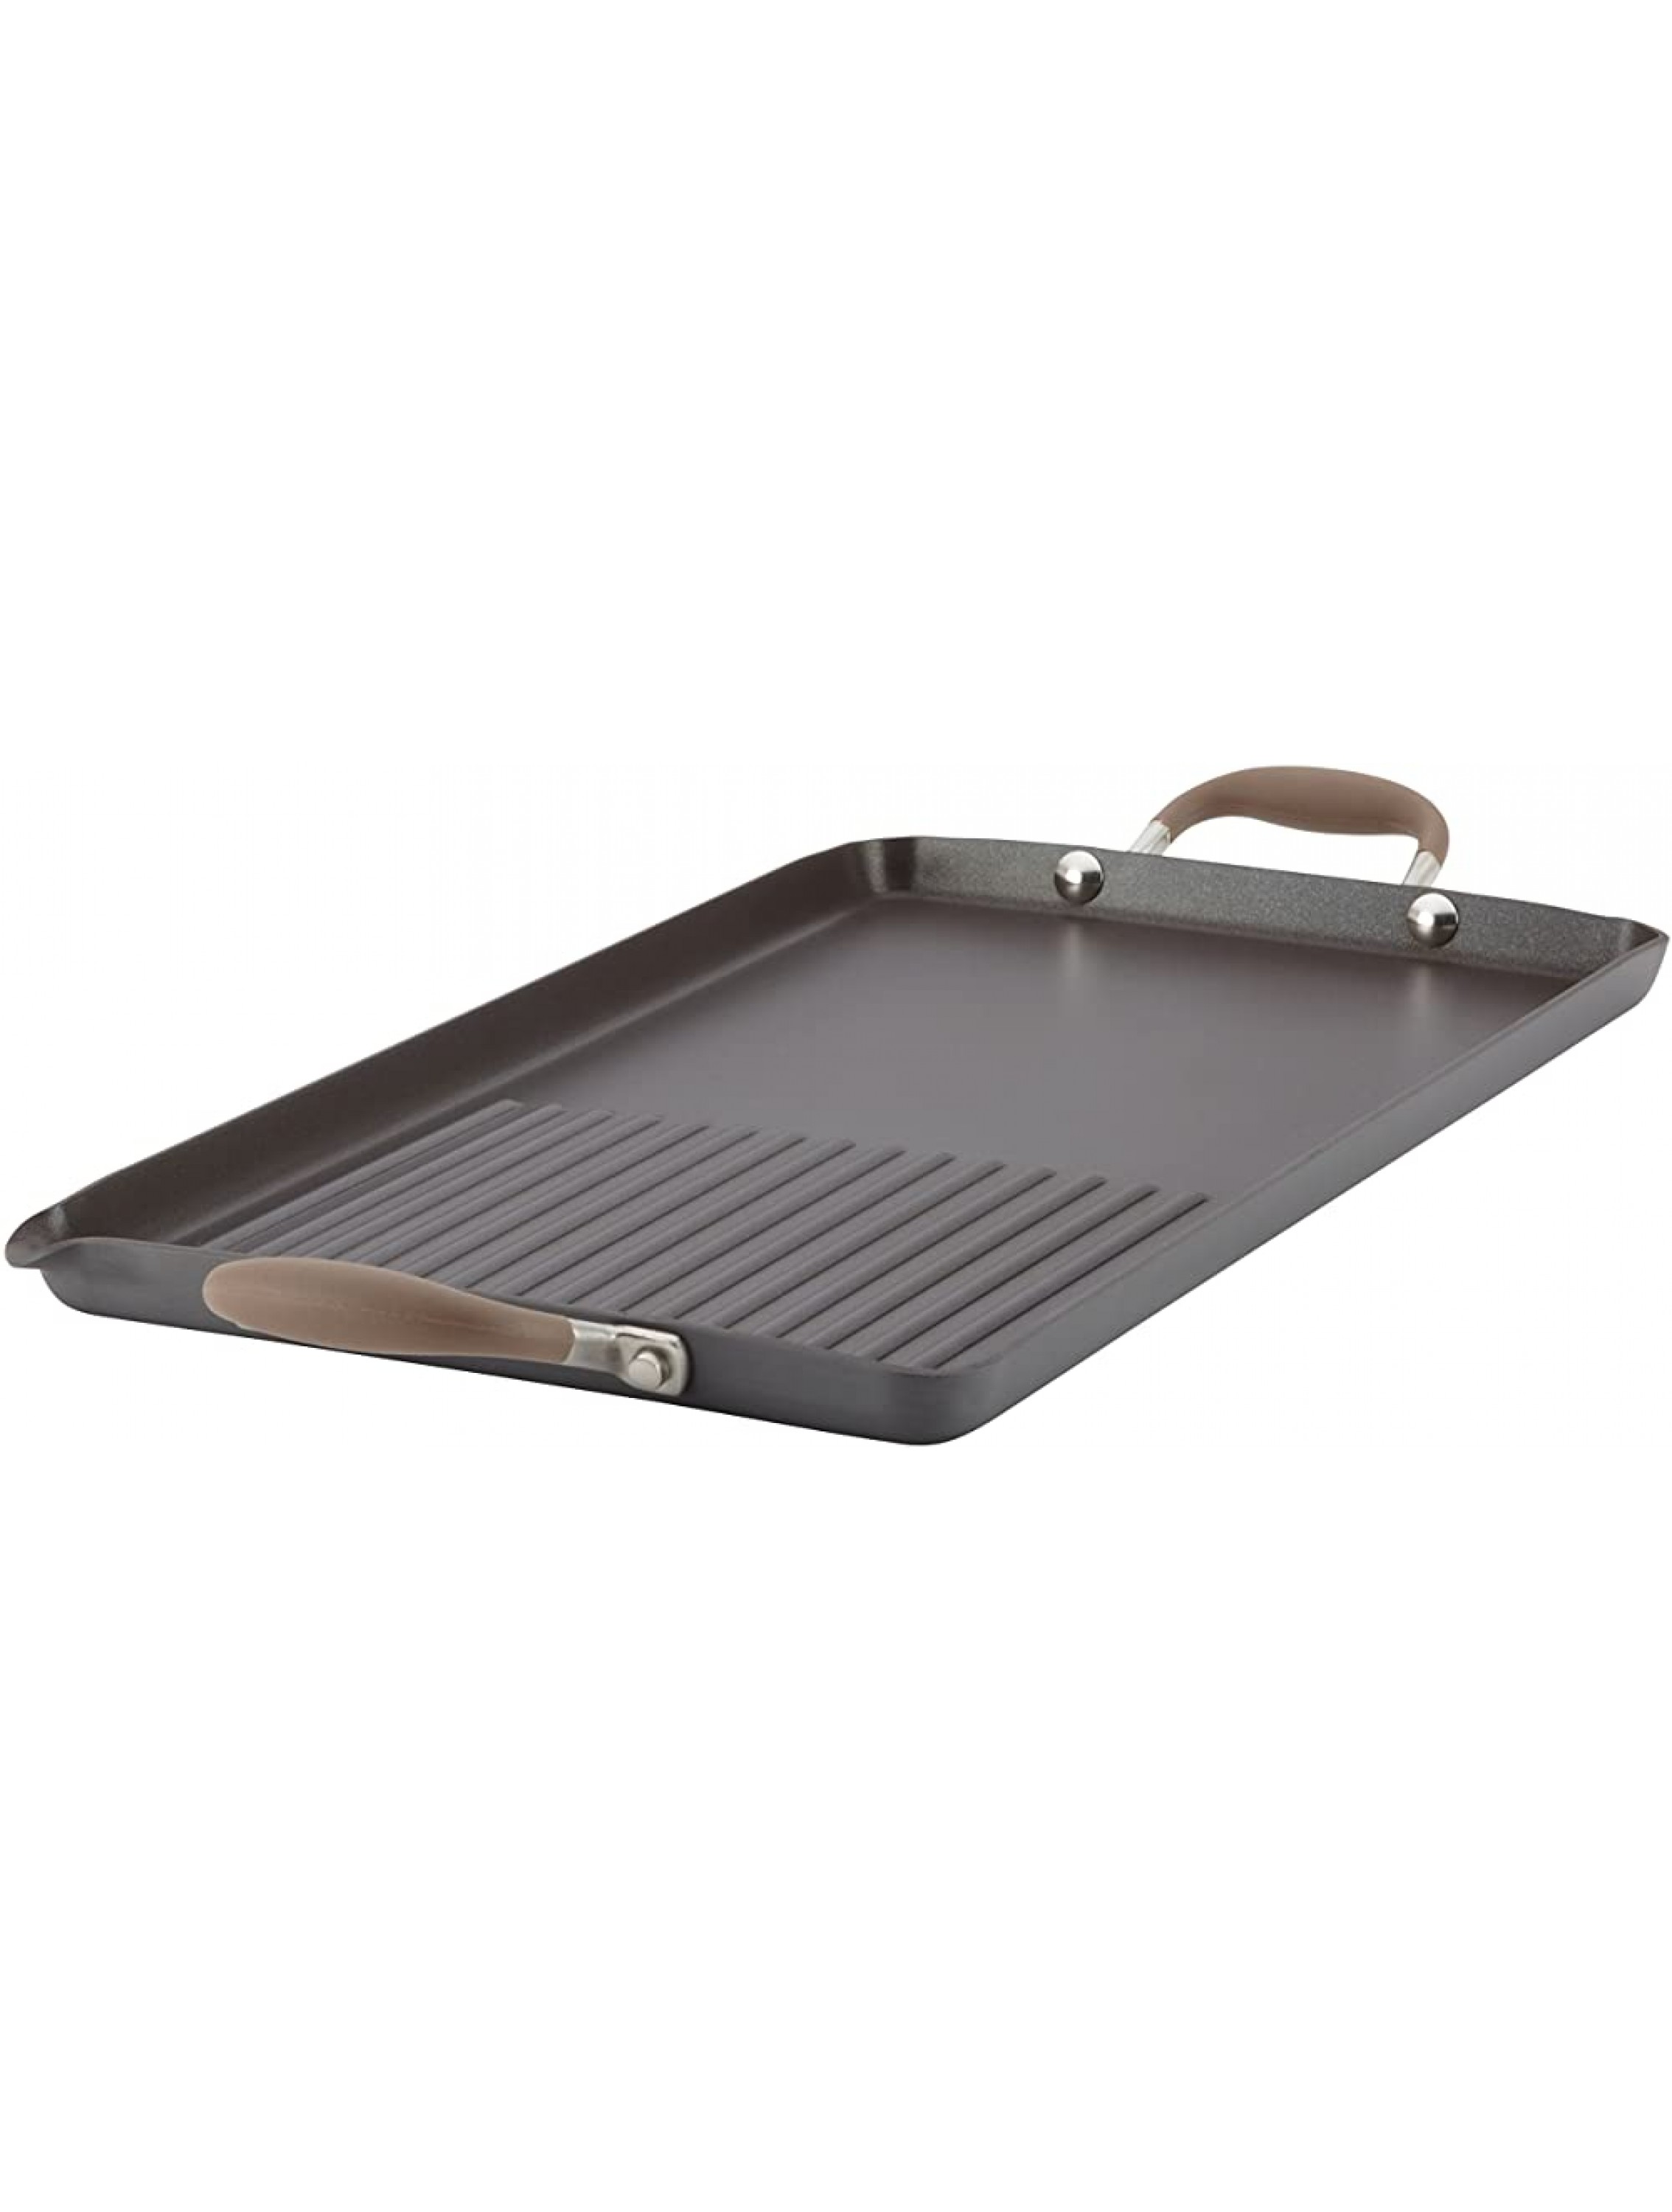 Anolon Advanced Hard Anodized Nonstick Double-Burner Griddle Grill Pan with Spout 10 Inch x 18 Inch Bronze - BQIKD2ANL